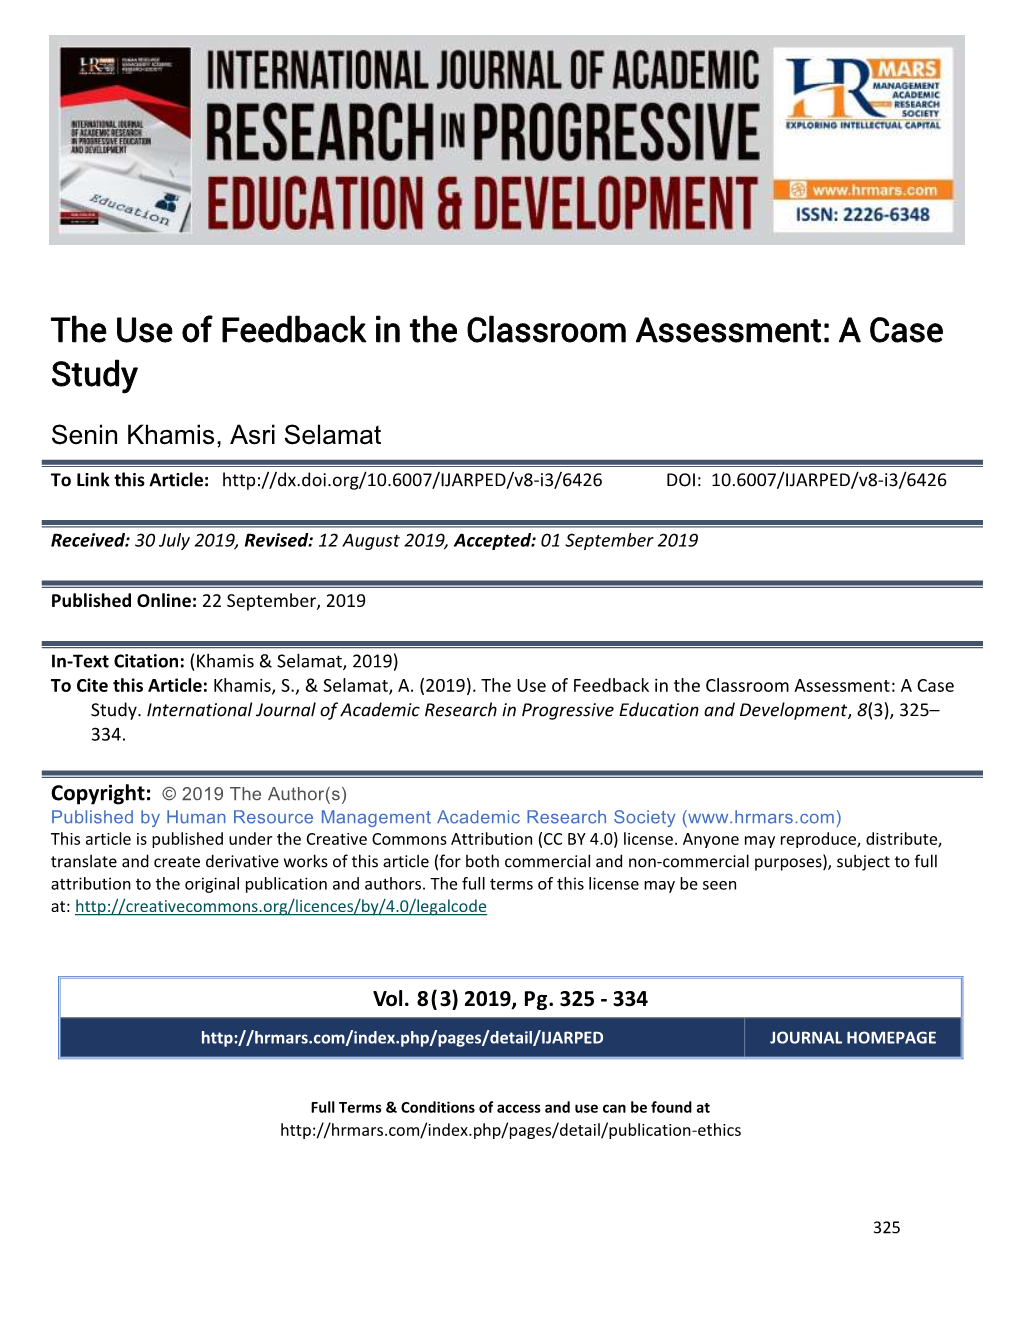 The Use of Feedback in the Classroom Assessment: a Case Study